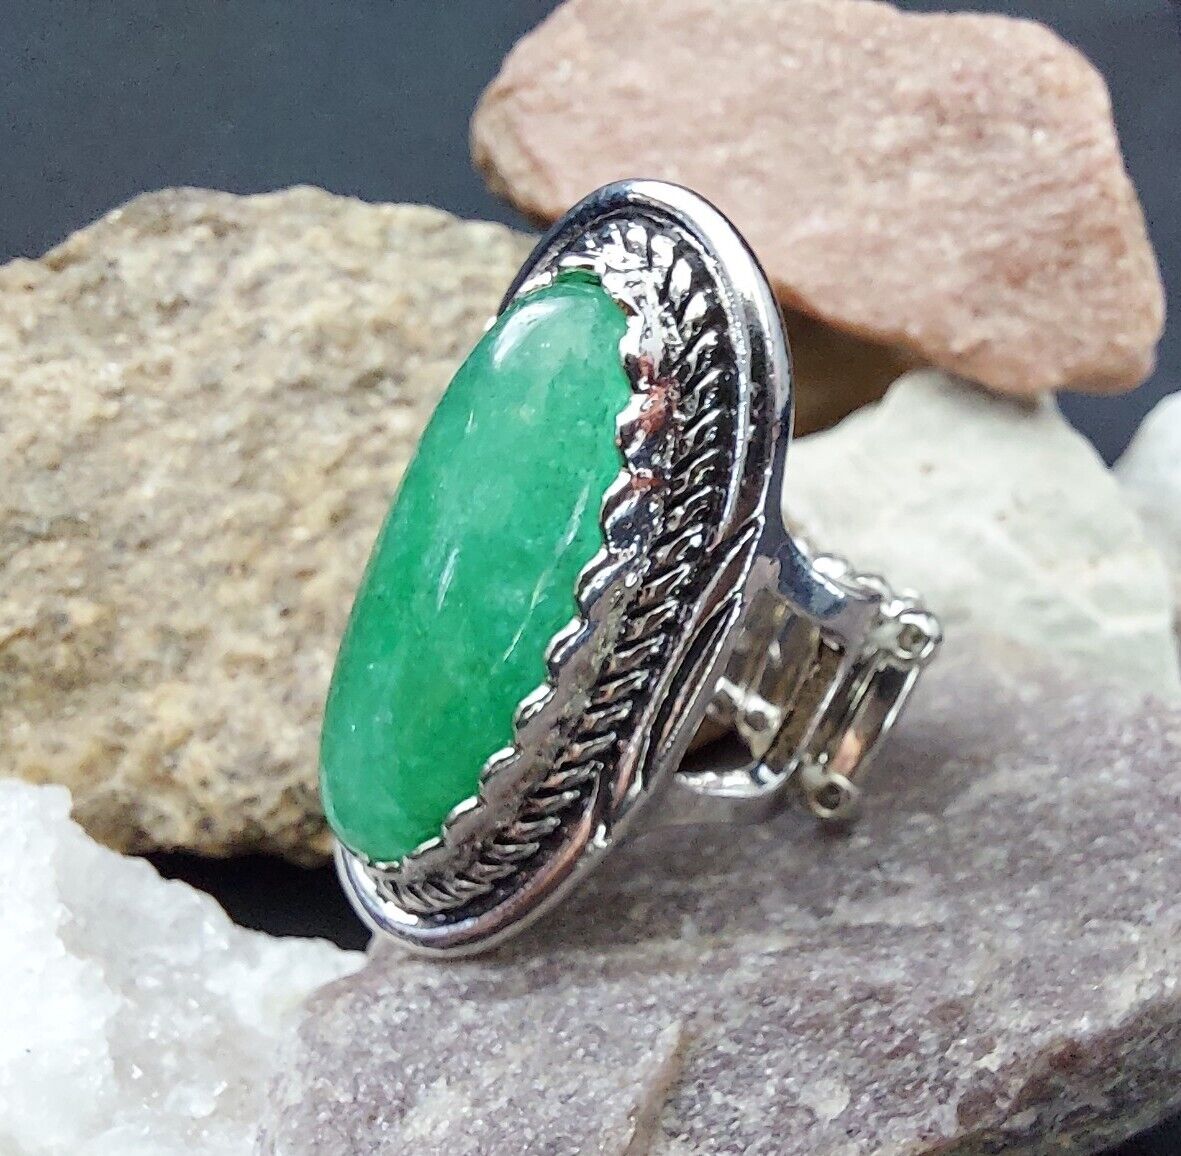 Revenge Spell Ring - Karma MAKE THEM PAY Coven Witch Owned - Sizes 8.5 9 9.5 10